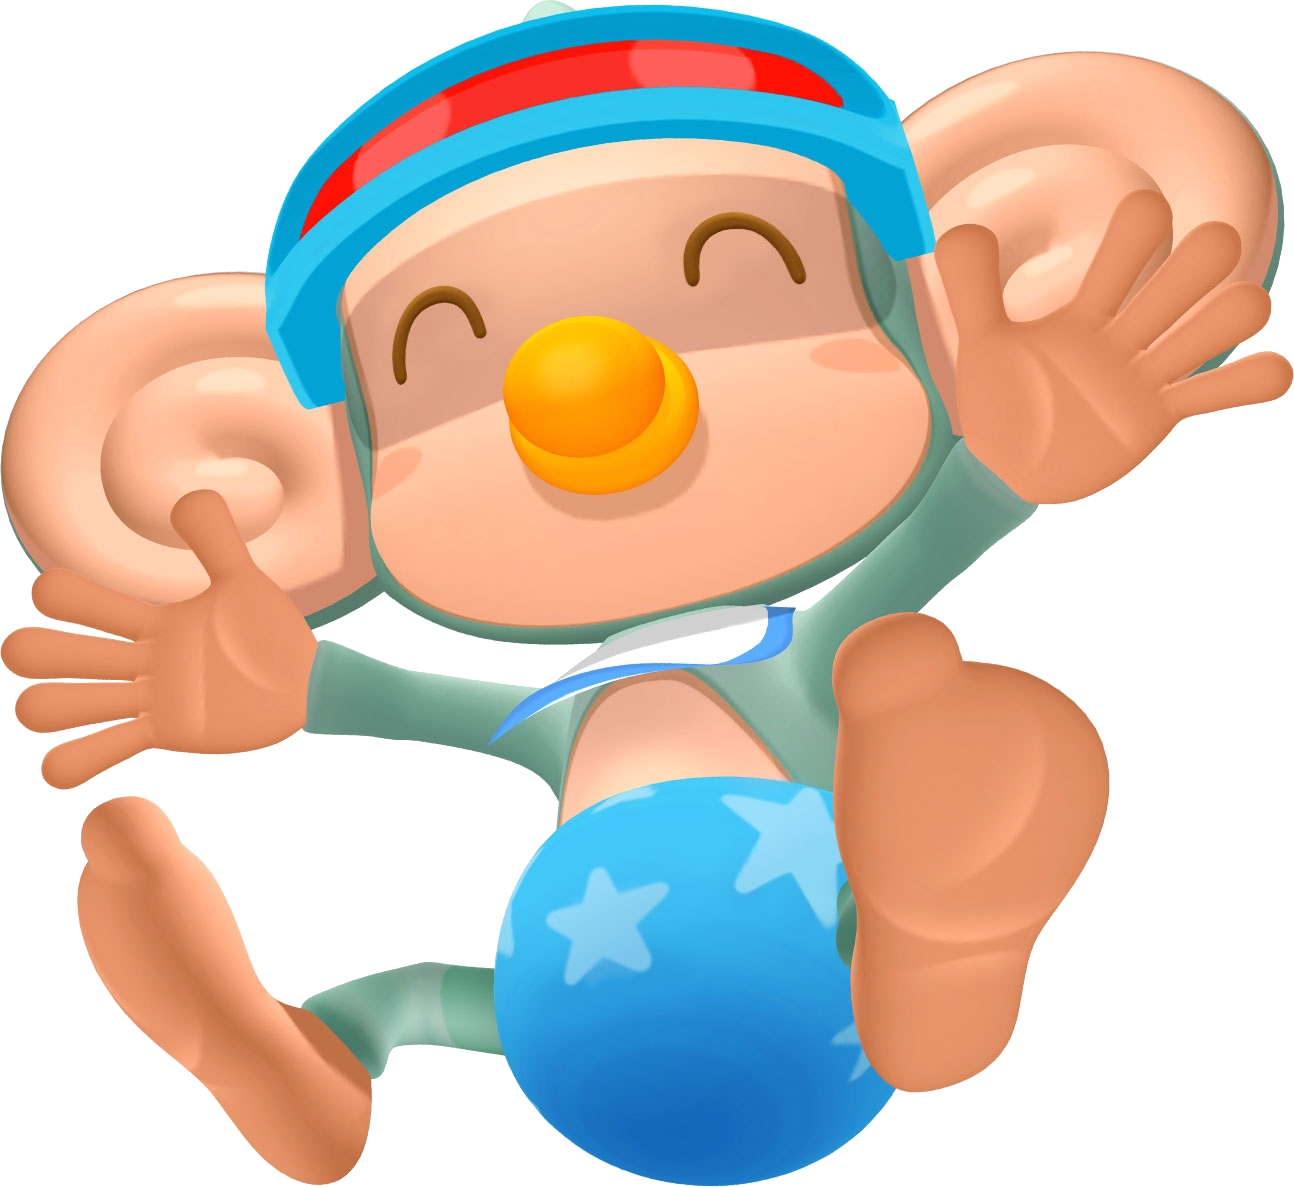 https://static.wikia.nocookie.net/supermonkeyball/images/9/91/BabySMB3D2.png/revision/latest?cb=20150701132518